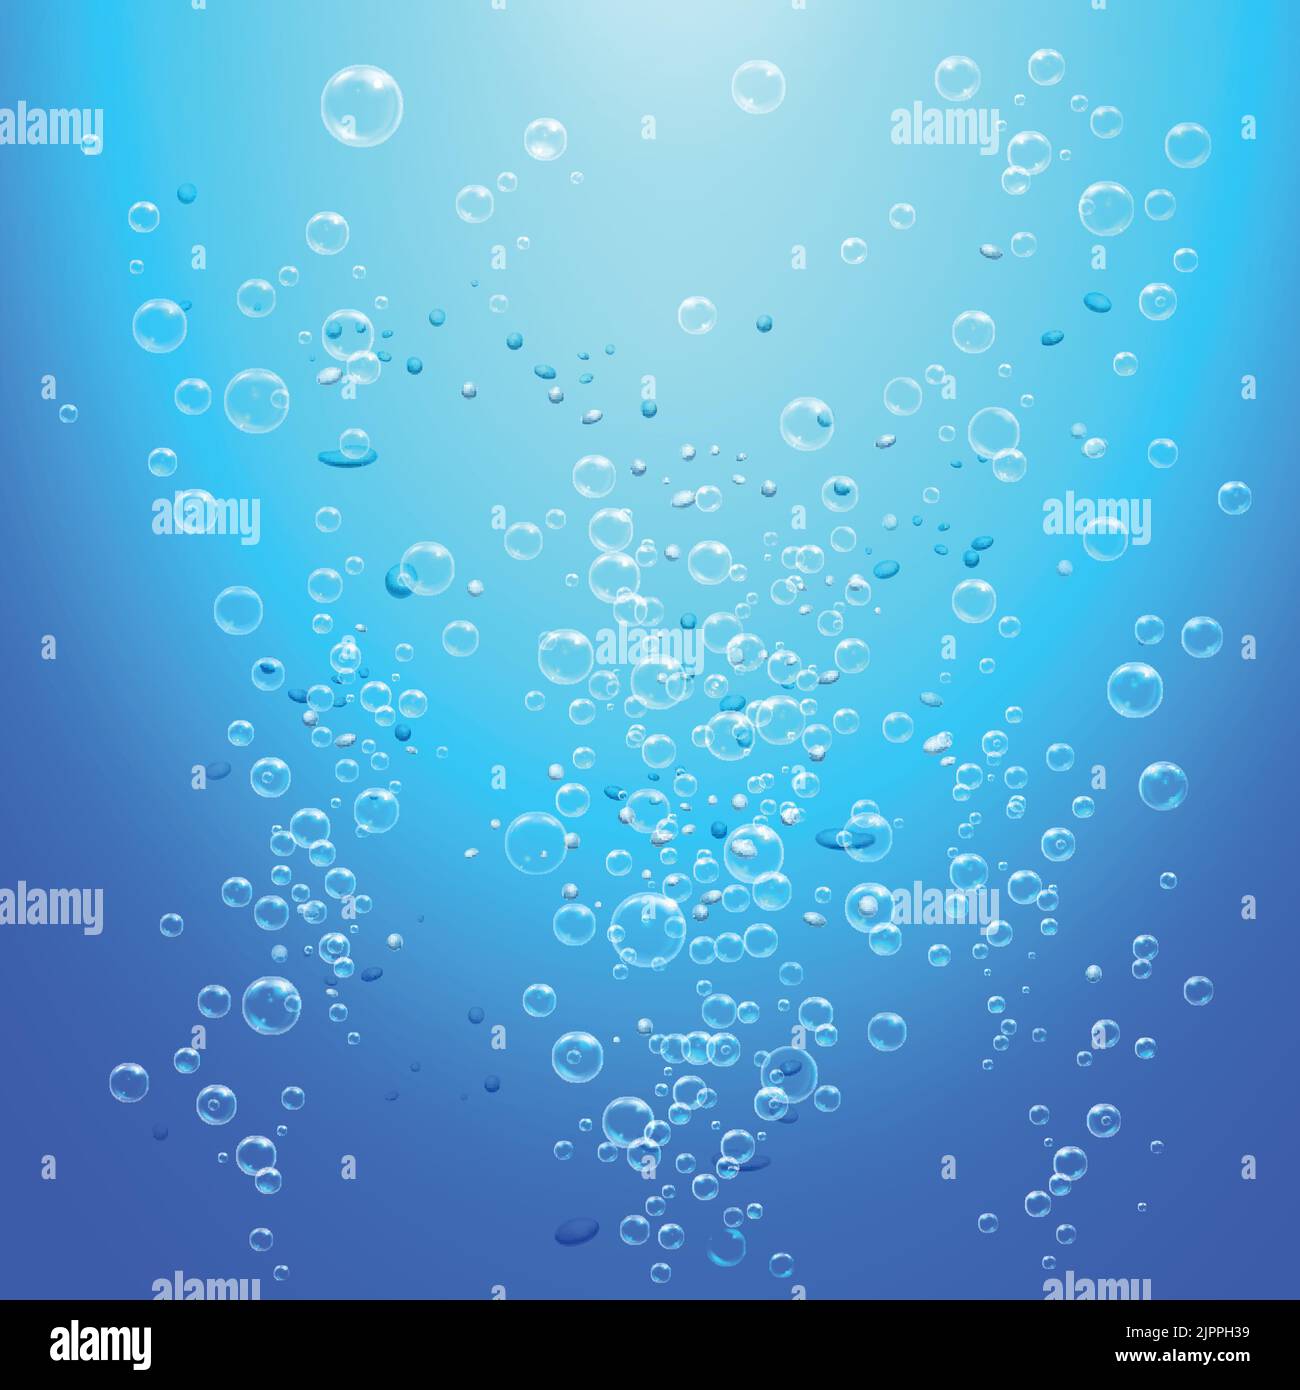 Realistic pure transparent water bubbles on blue background vector illustration Stock Vector